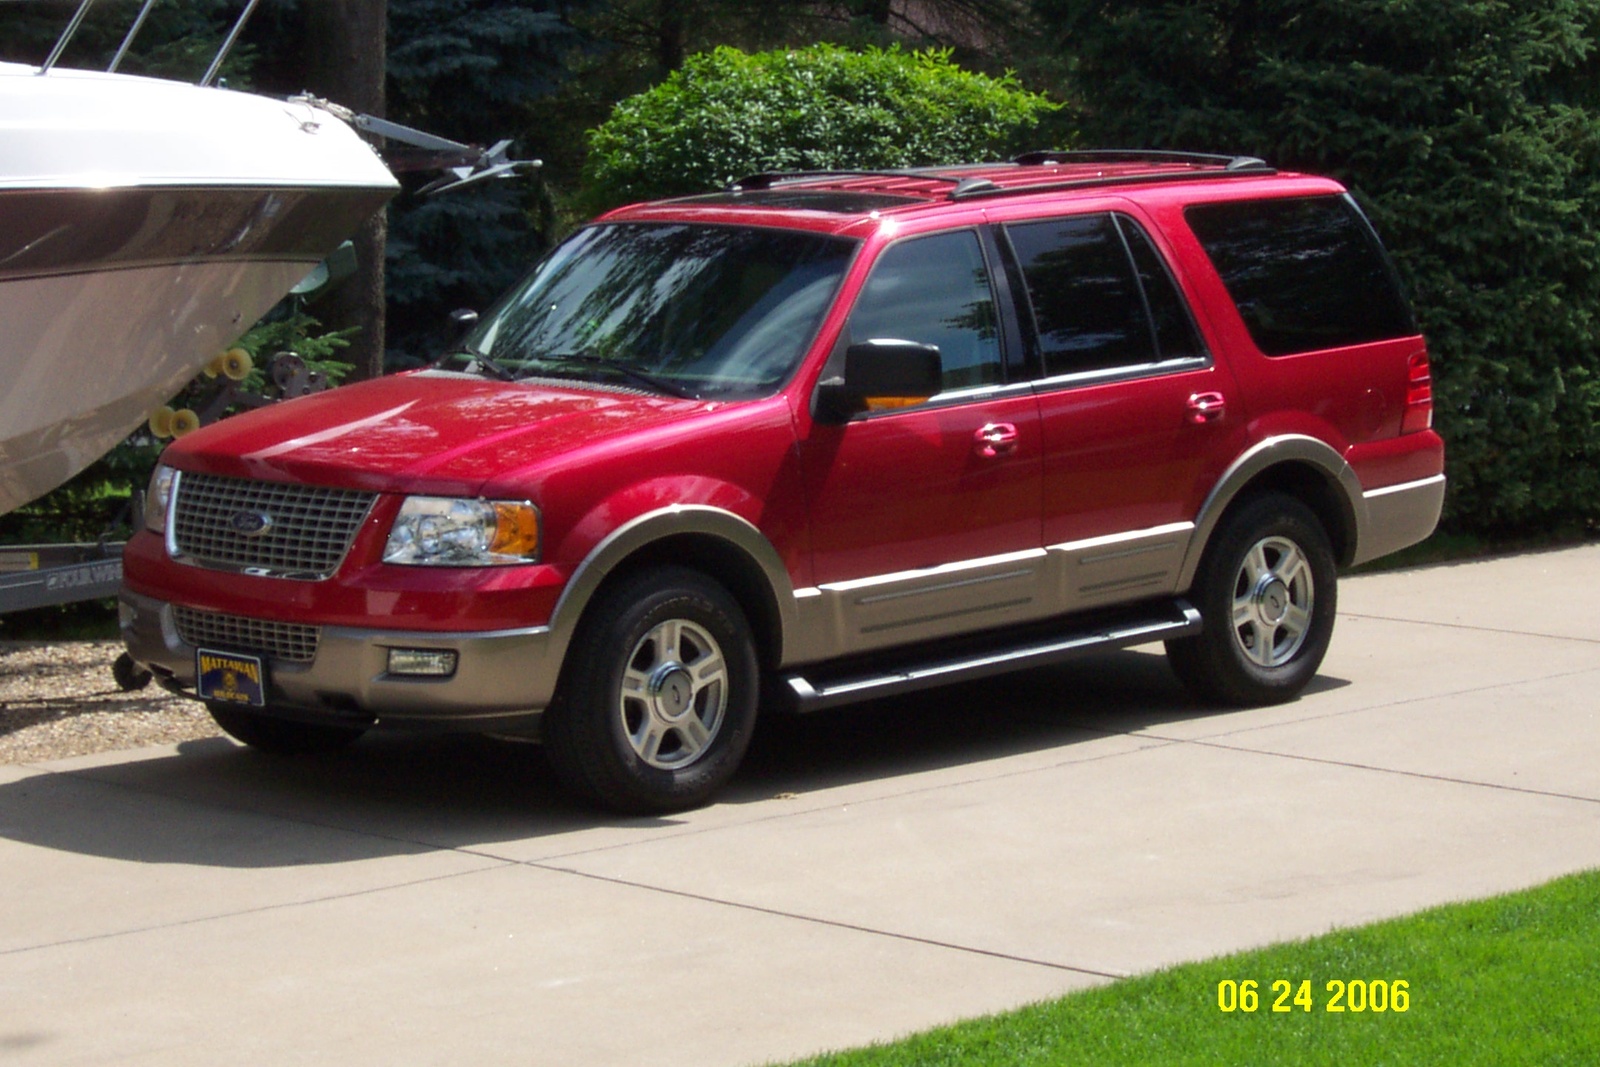 2003 Ford Expedition Pictures Cargurus